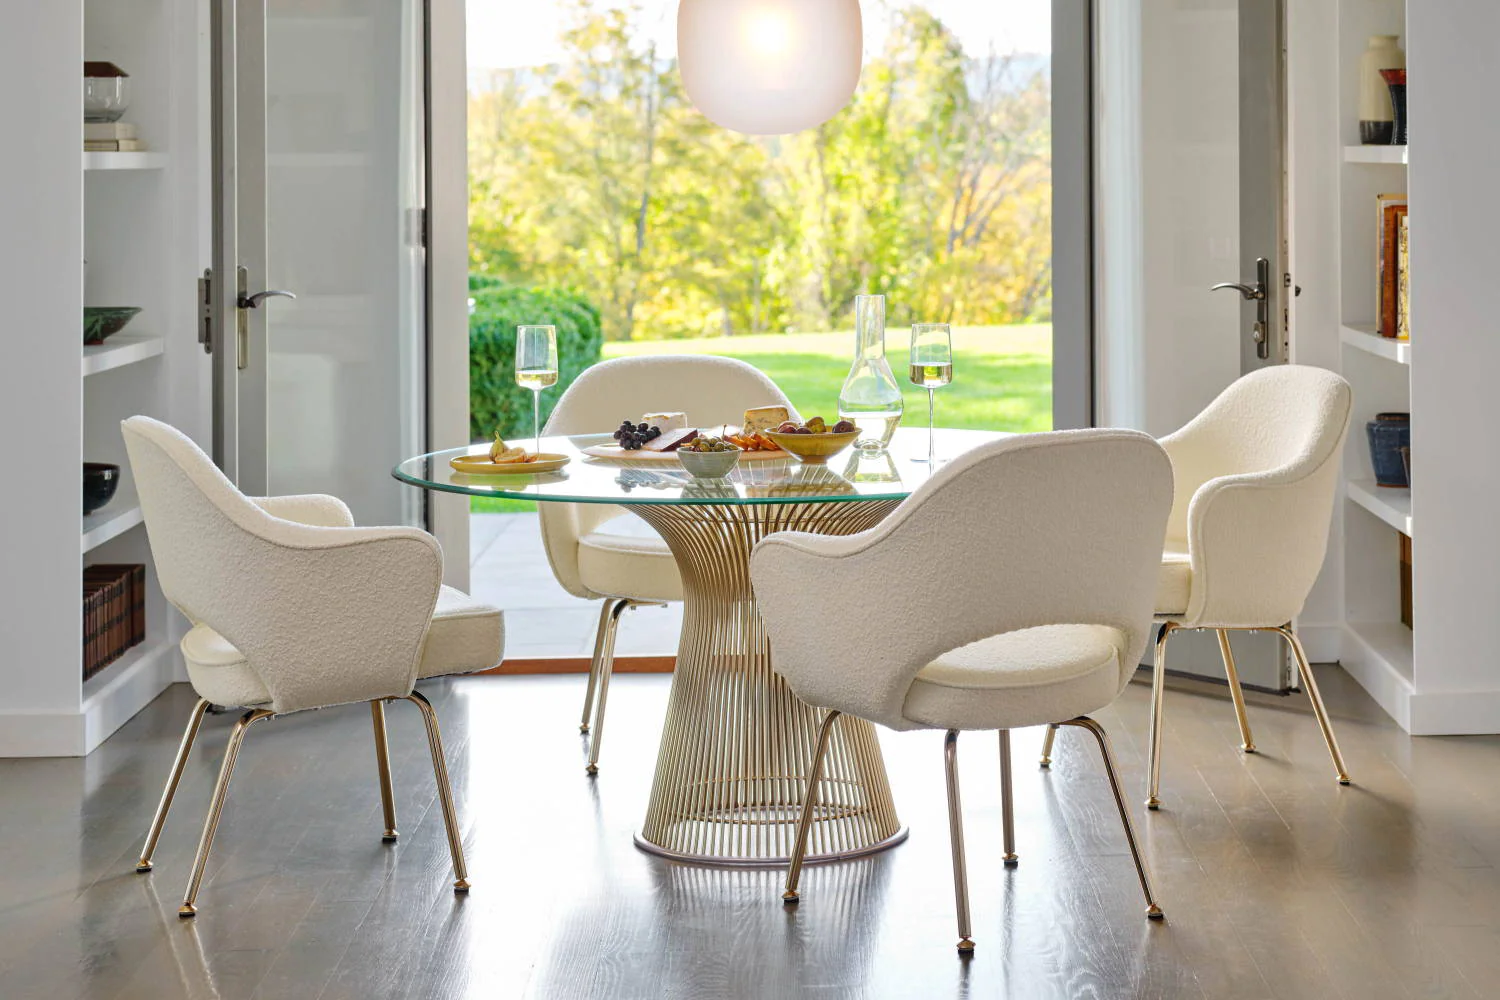 How Much Space is Needed for a Dining Table and Chairs? .jpg